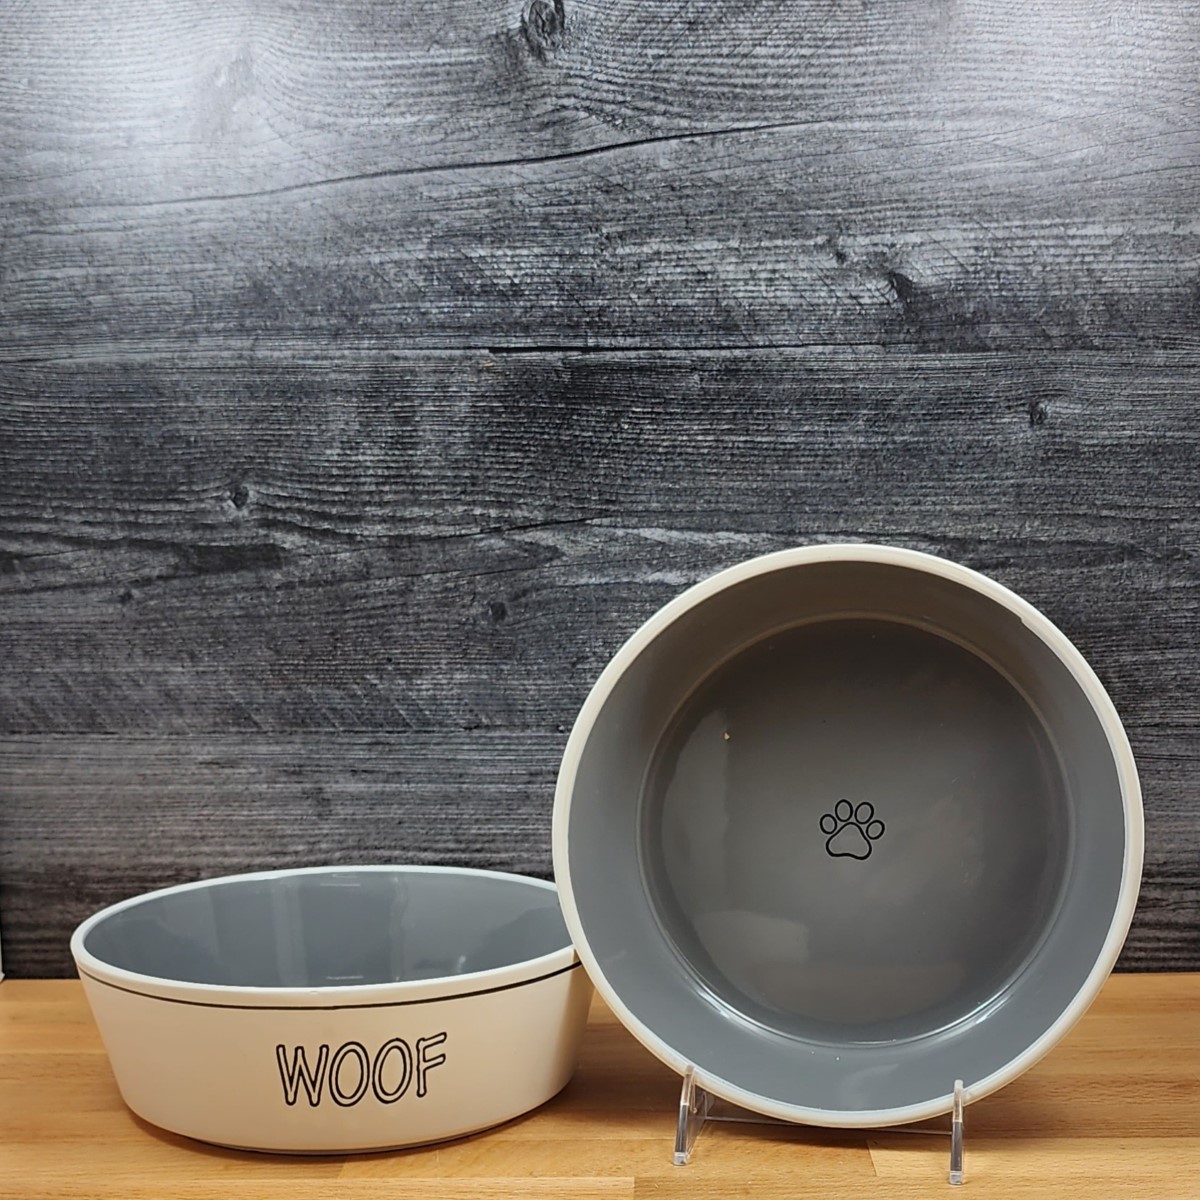 This Dog Water Food Bowl Set Embossed Treat Dish In Grey and White by Blue Sky is made with love by Premier Homegoods! Shop more unique gift ideas today with Spots Initiatives, the best way to support creators.